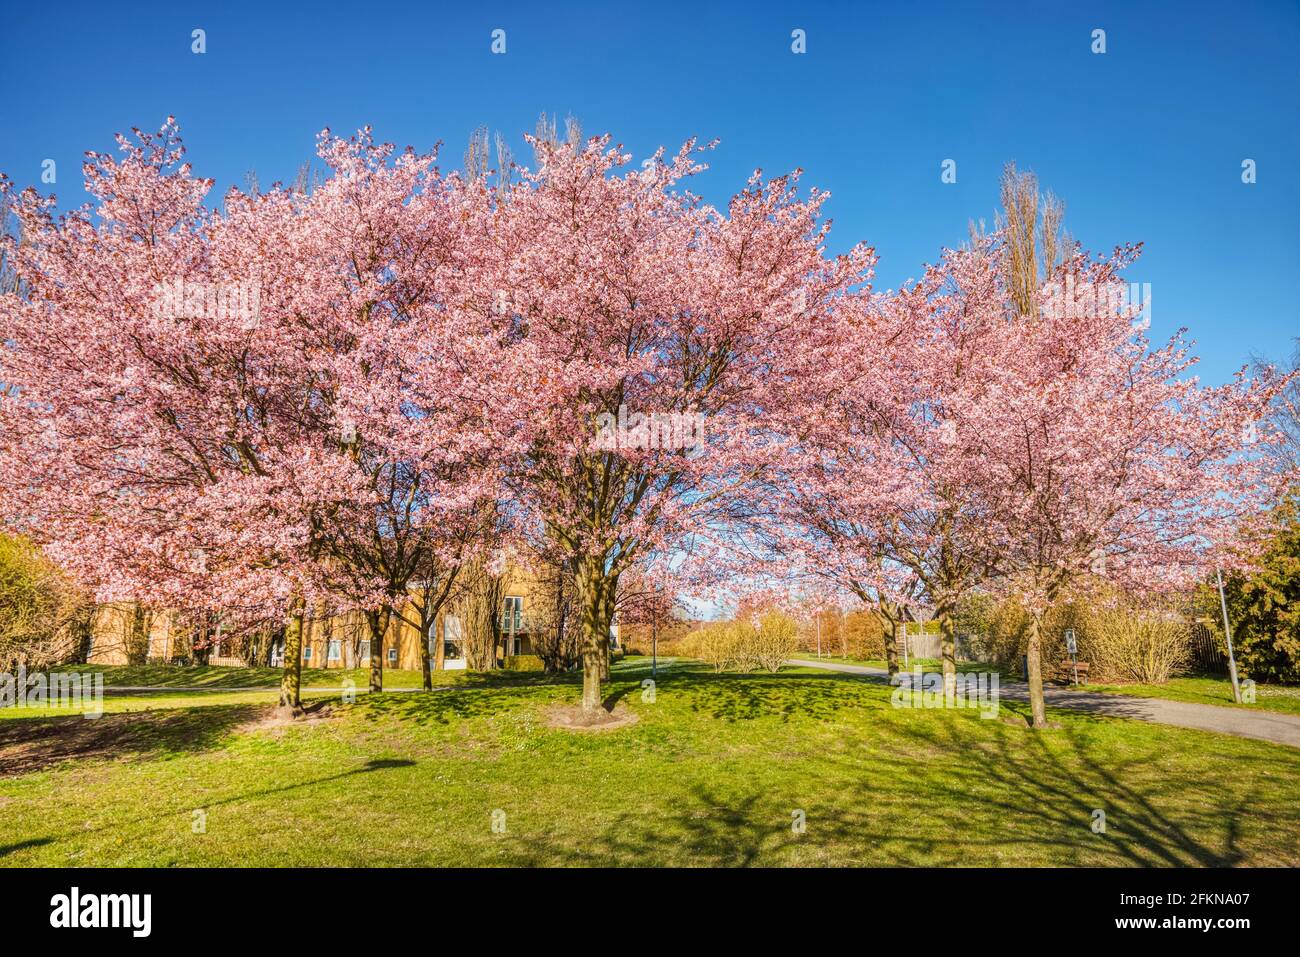 Copse of blooming cherry trees in a charming park with trail. Enchanting Sakura trees with pink cherry blossoms in a Swedish wealthy residential area Stock Photo